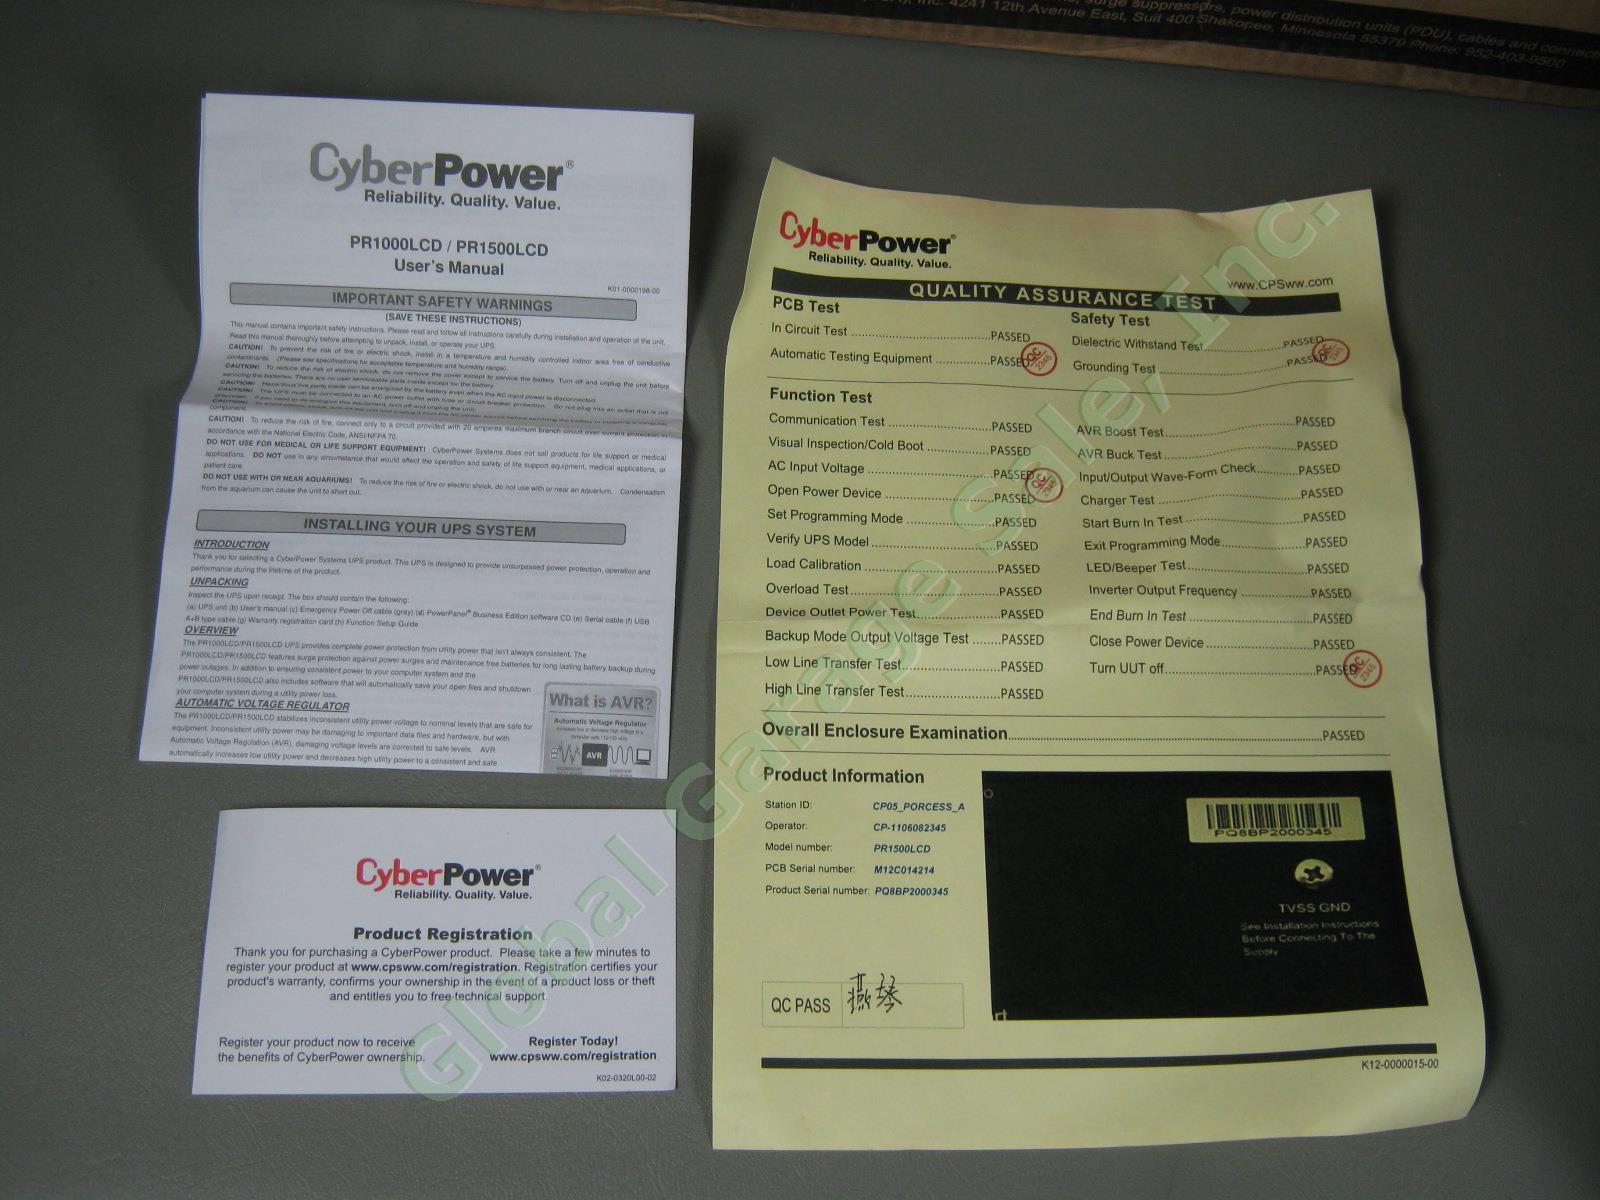 CyberPower PR1500LCD LCD UPS 1500VA 1050W Smart App Sine Wave Tower Barely Used! 6